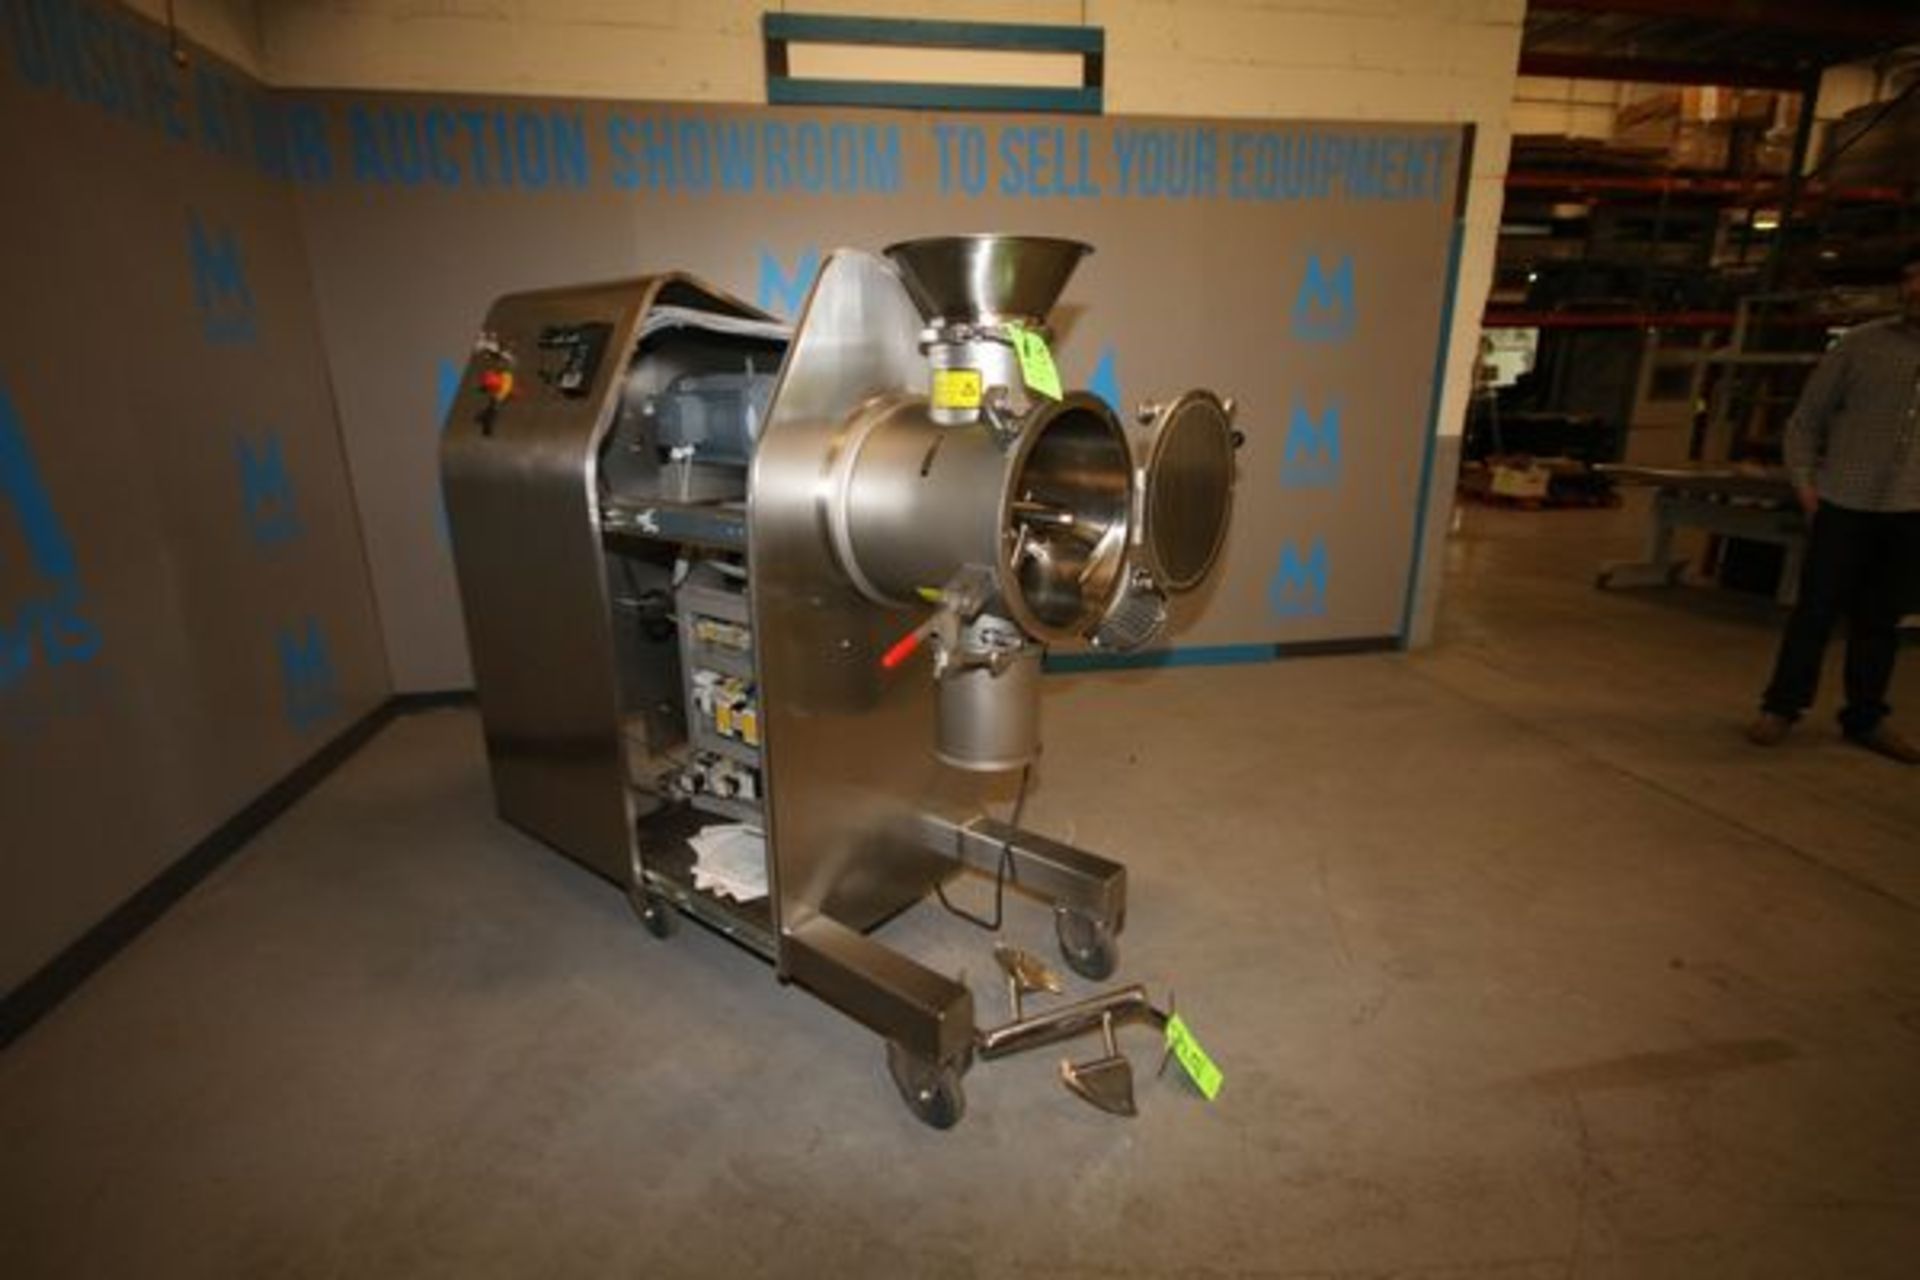 2011 Lodige 50 Liter Batch Mixer, Model L 50, S/N 16592, Equipped with 6-Paddle Horizontal Mixer and - Image 2 of 7